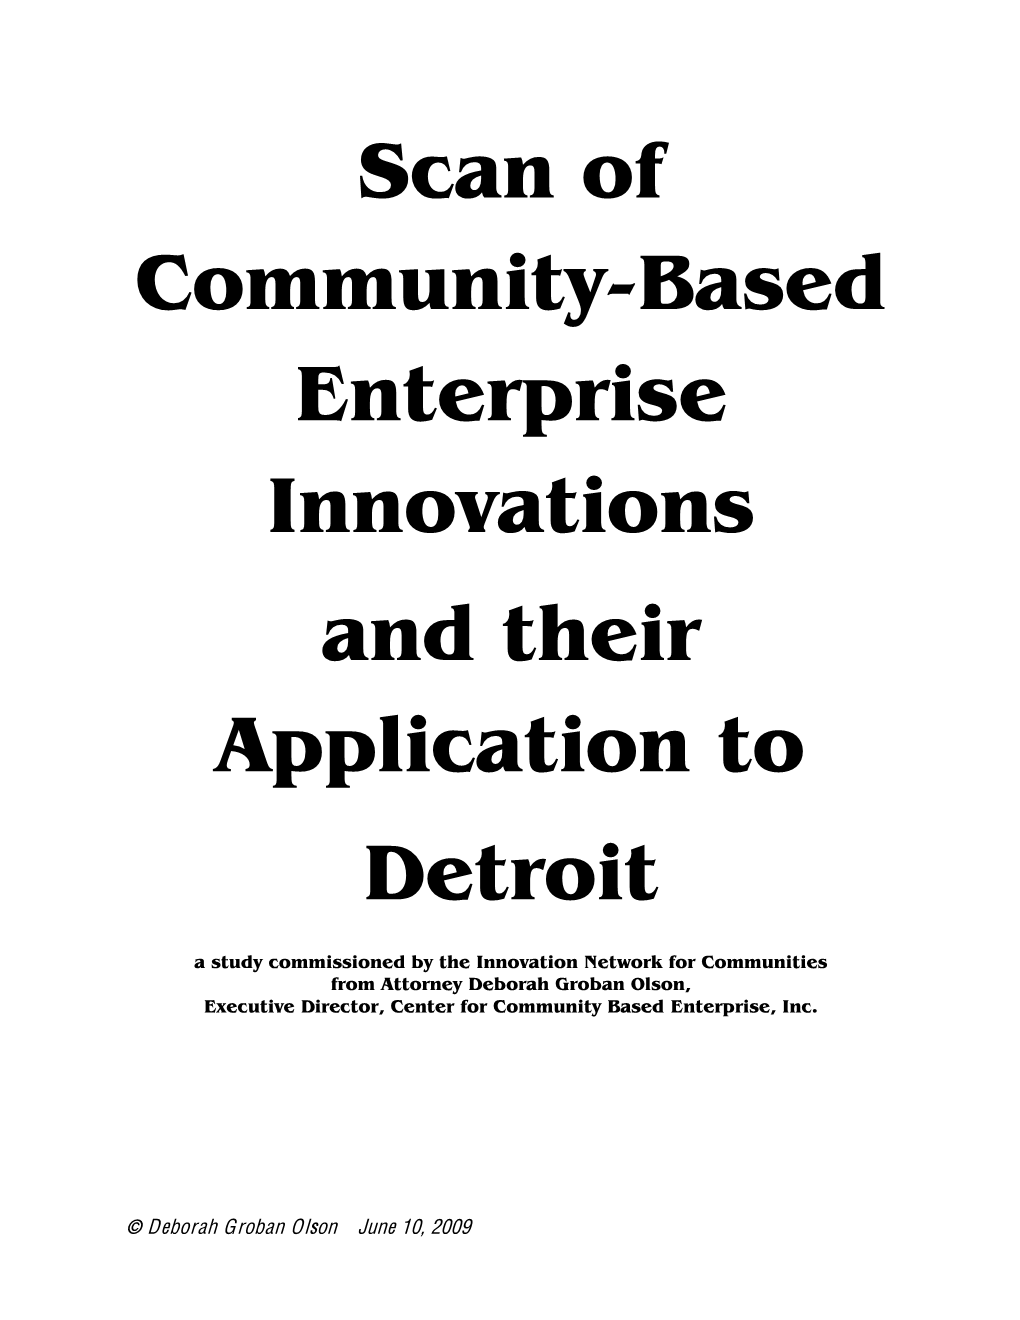 Scan of Community Based Enterprise Innovations and Their